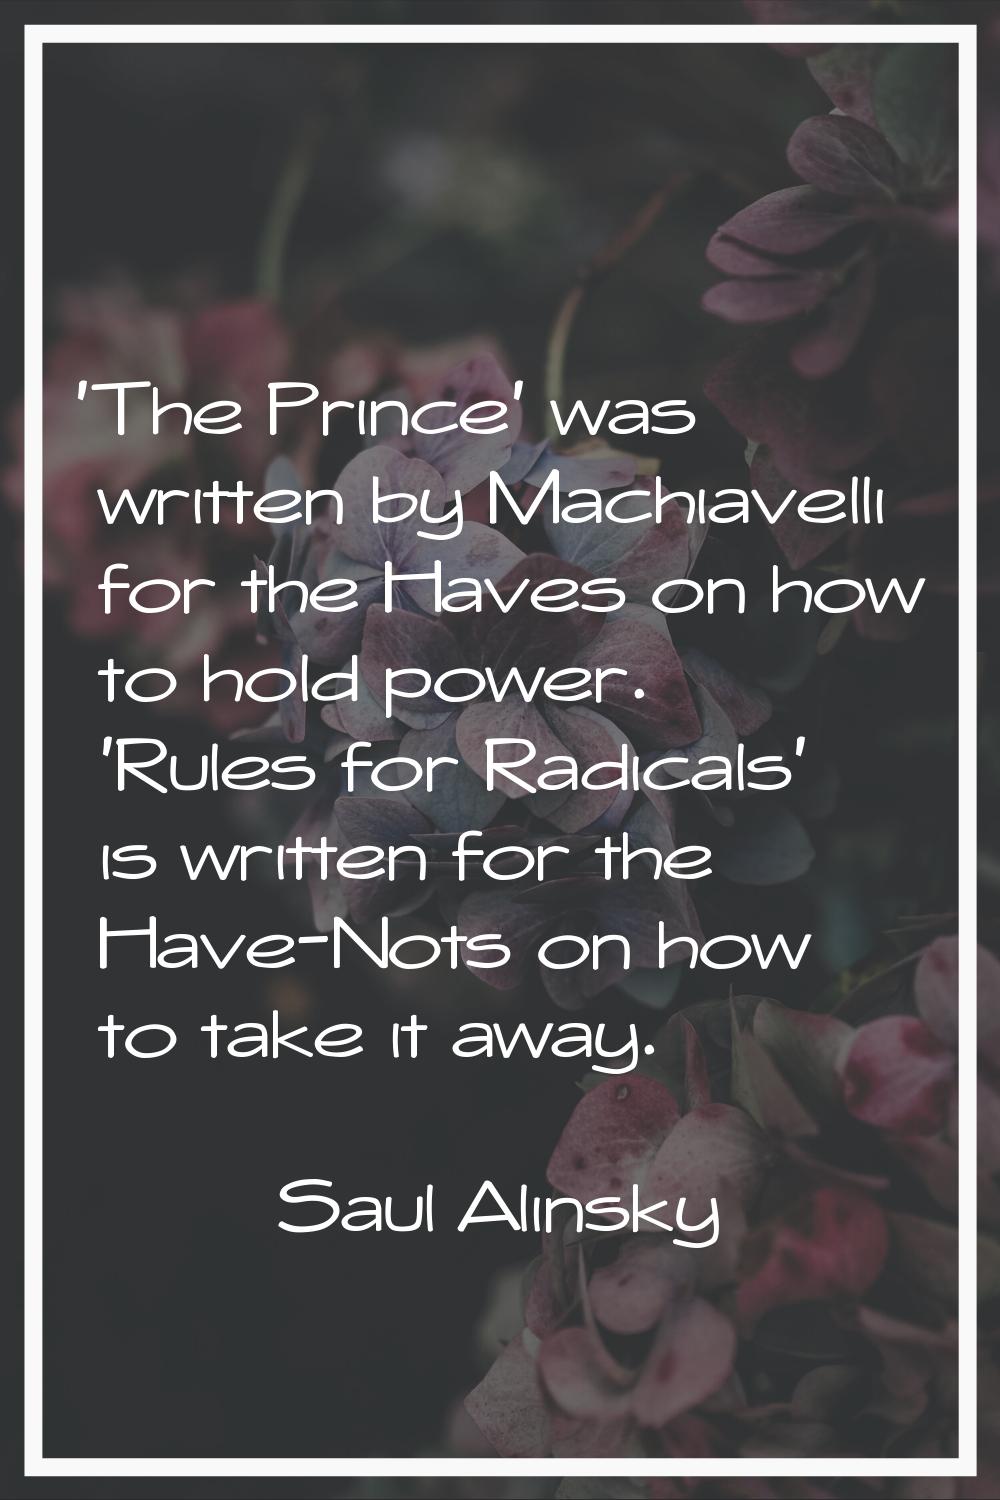 'The Prince' was written by Machiavelli for the Haves on how to hold power. 'Rules for Radicals' is